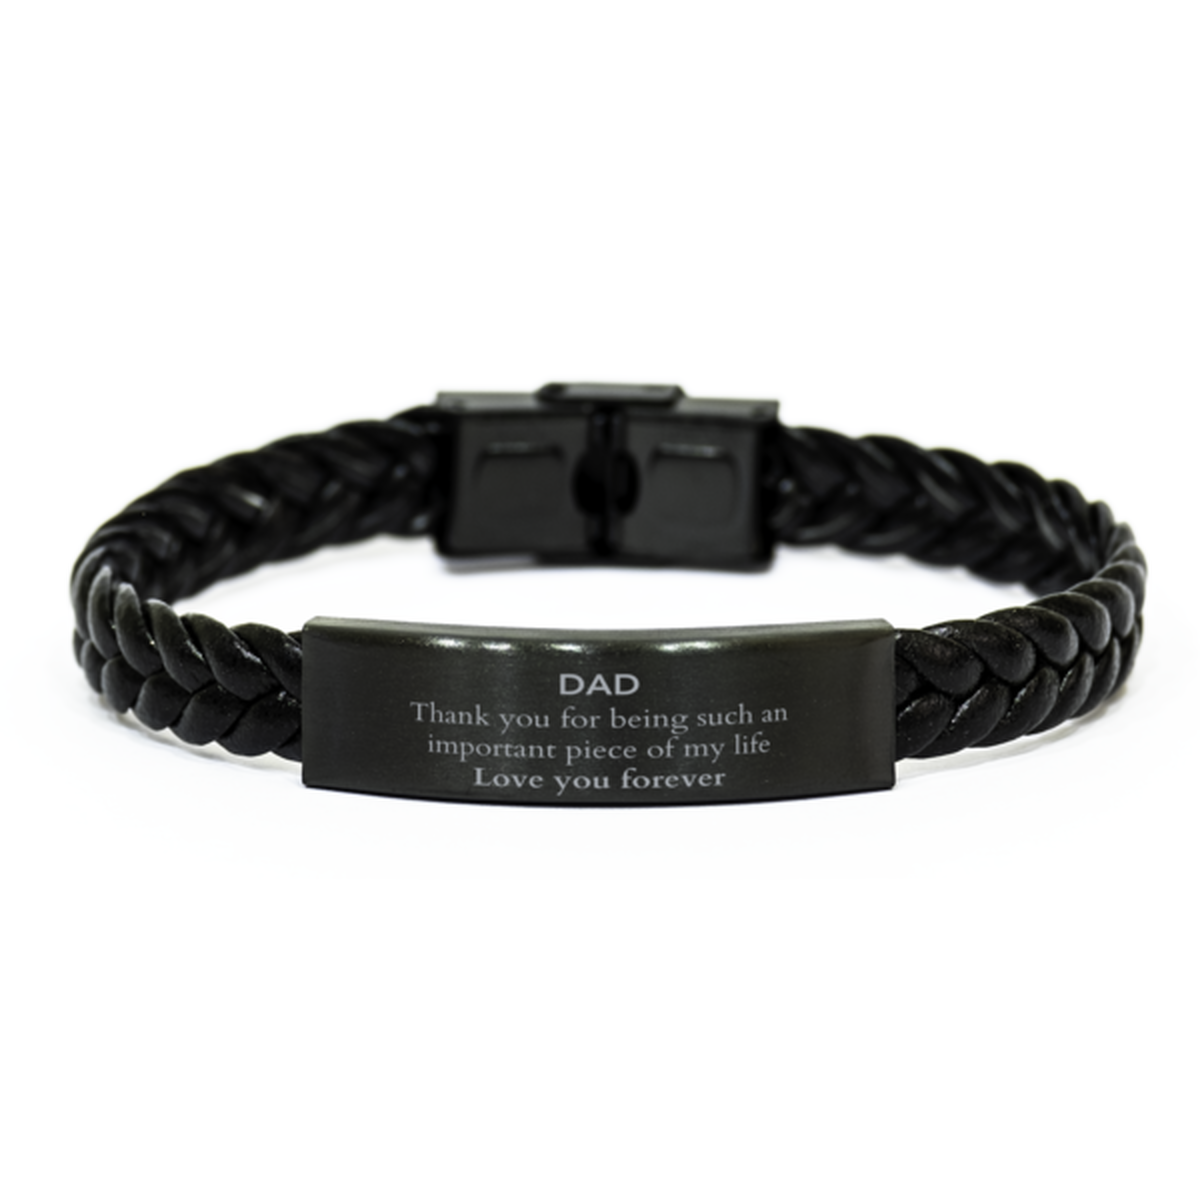 Appropriate Dad Braided Leather Bracelet Epic Birthday Gifts for Dad Thank you for being such an important piece of my life Dad Christmas Mothers Fathers Day